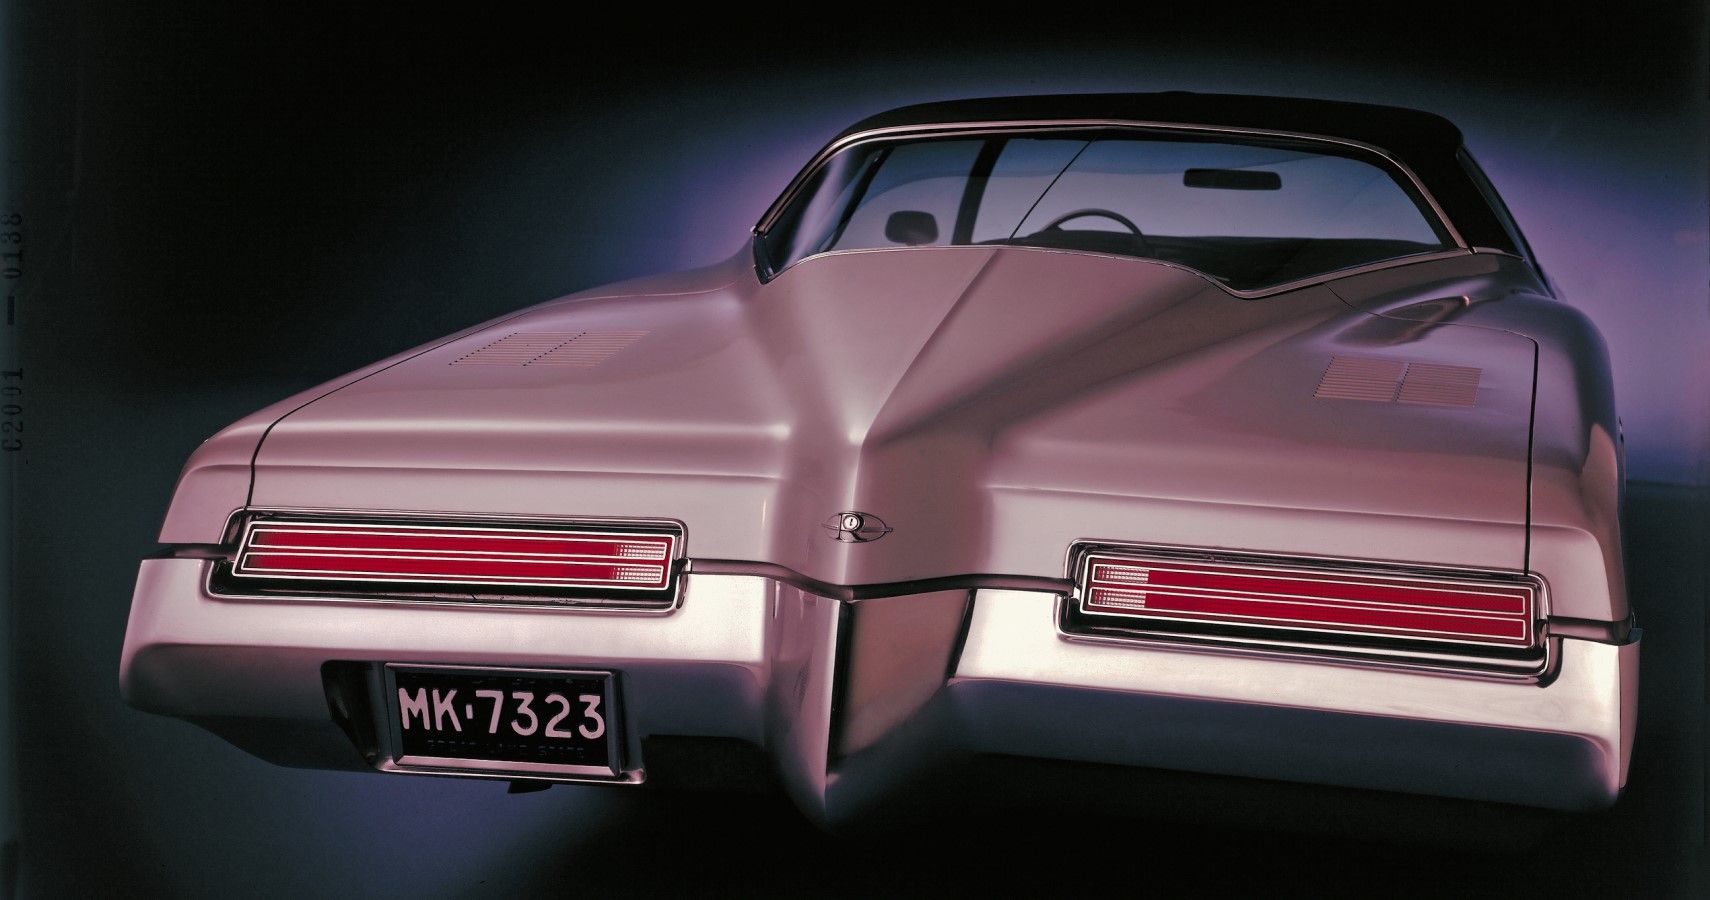 1971 Buick Riviera rear view